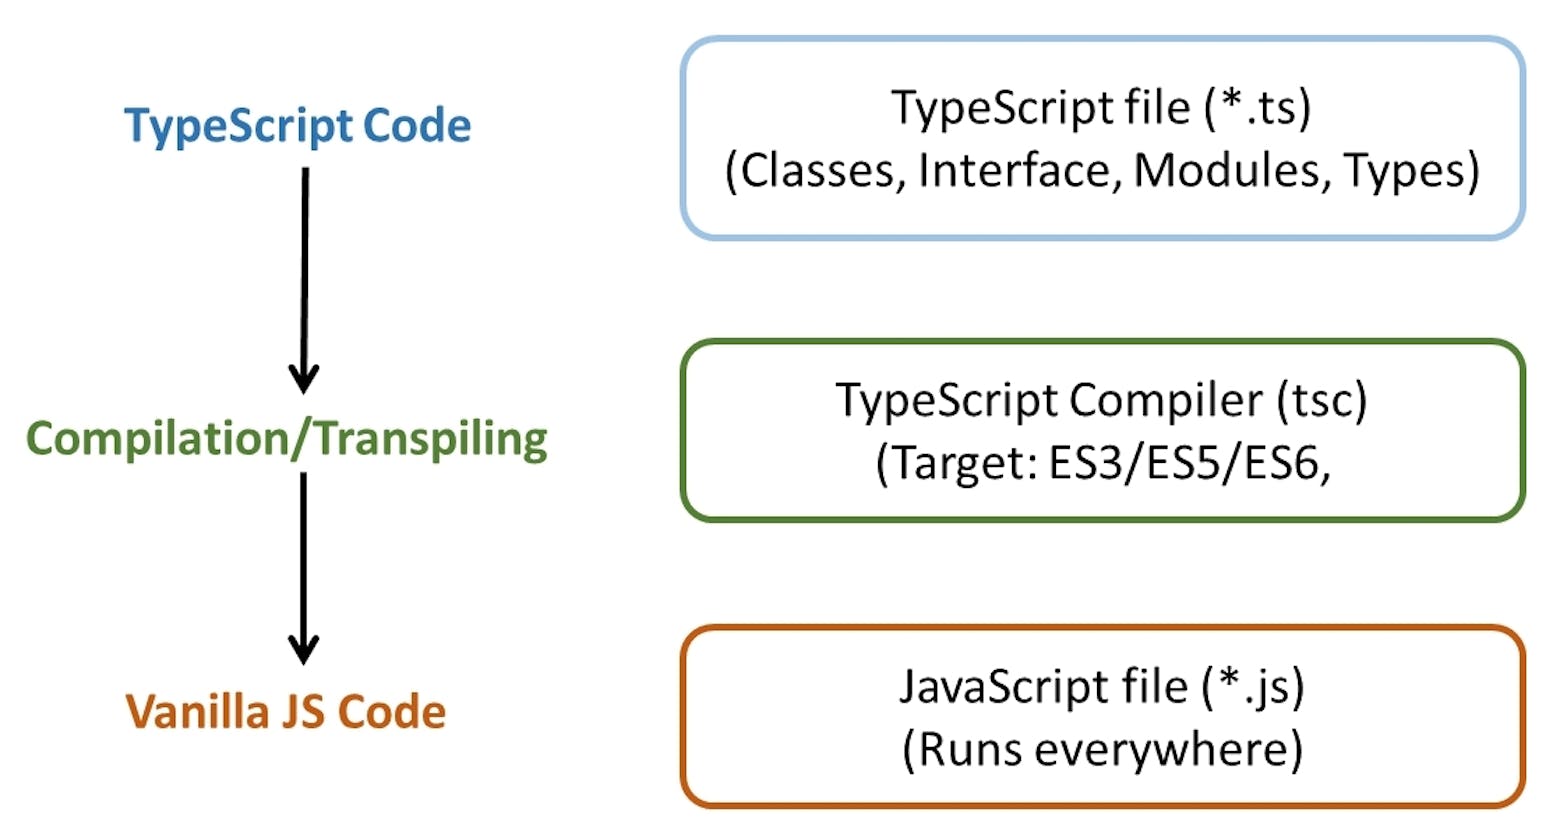 This is a JavaScript world! 5 Languages that compile to JS